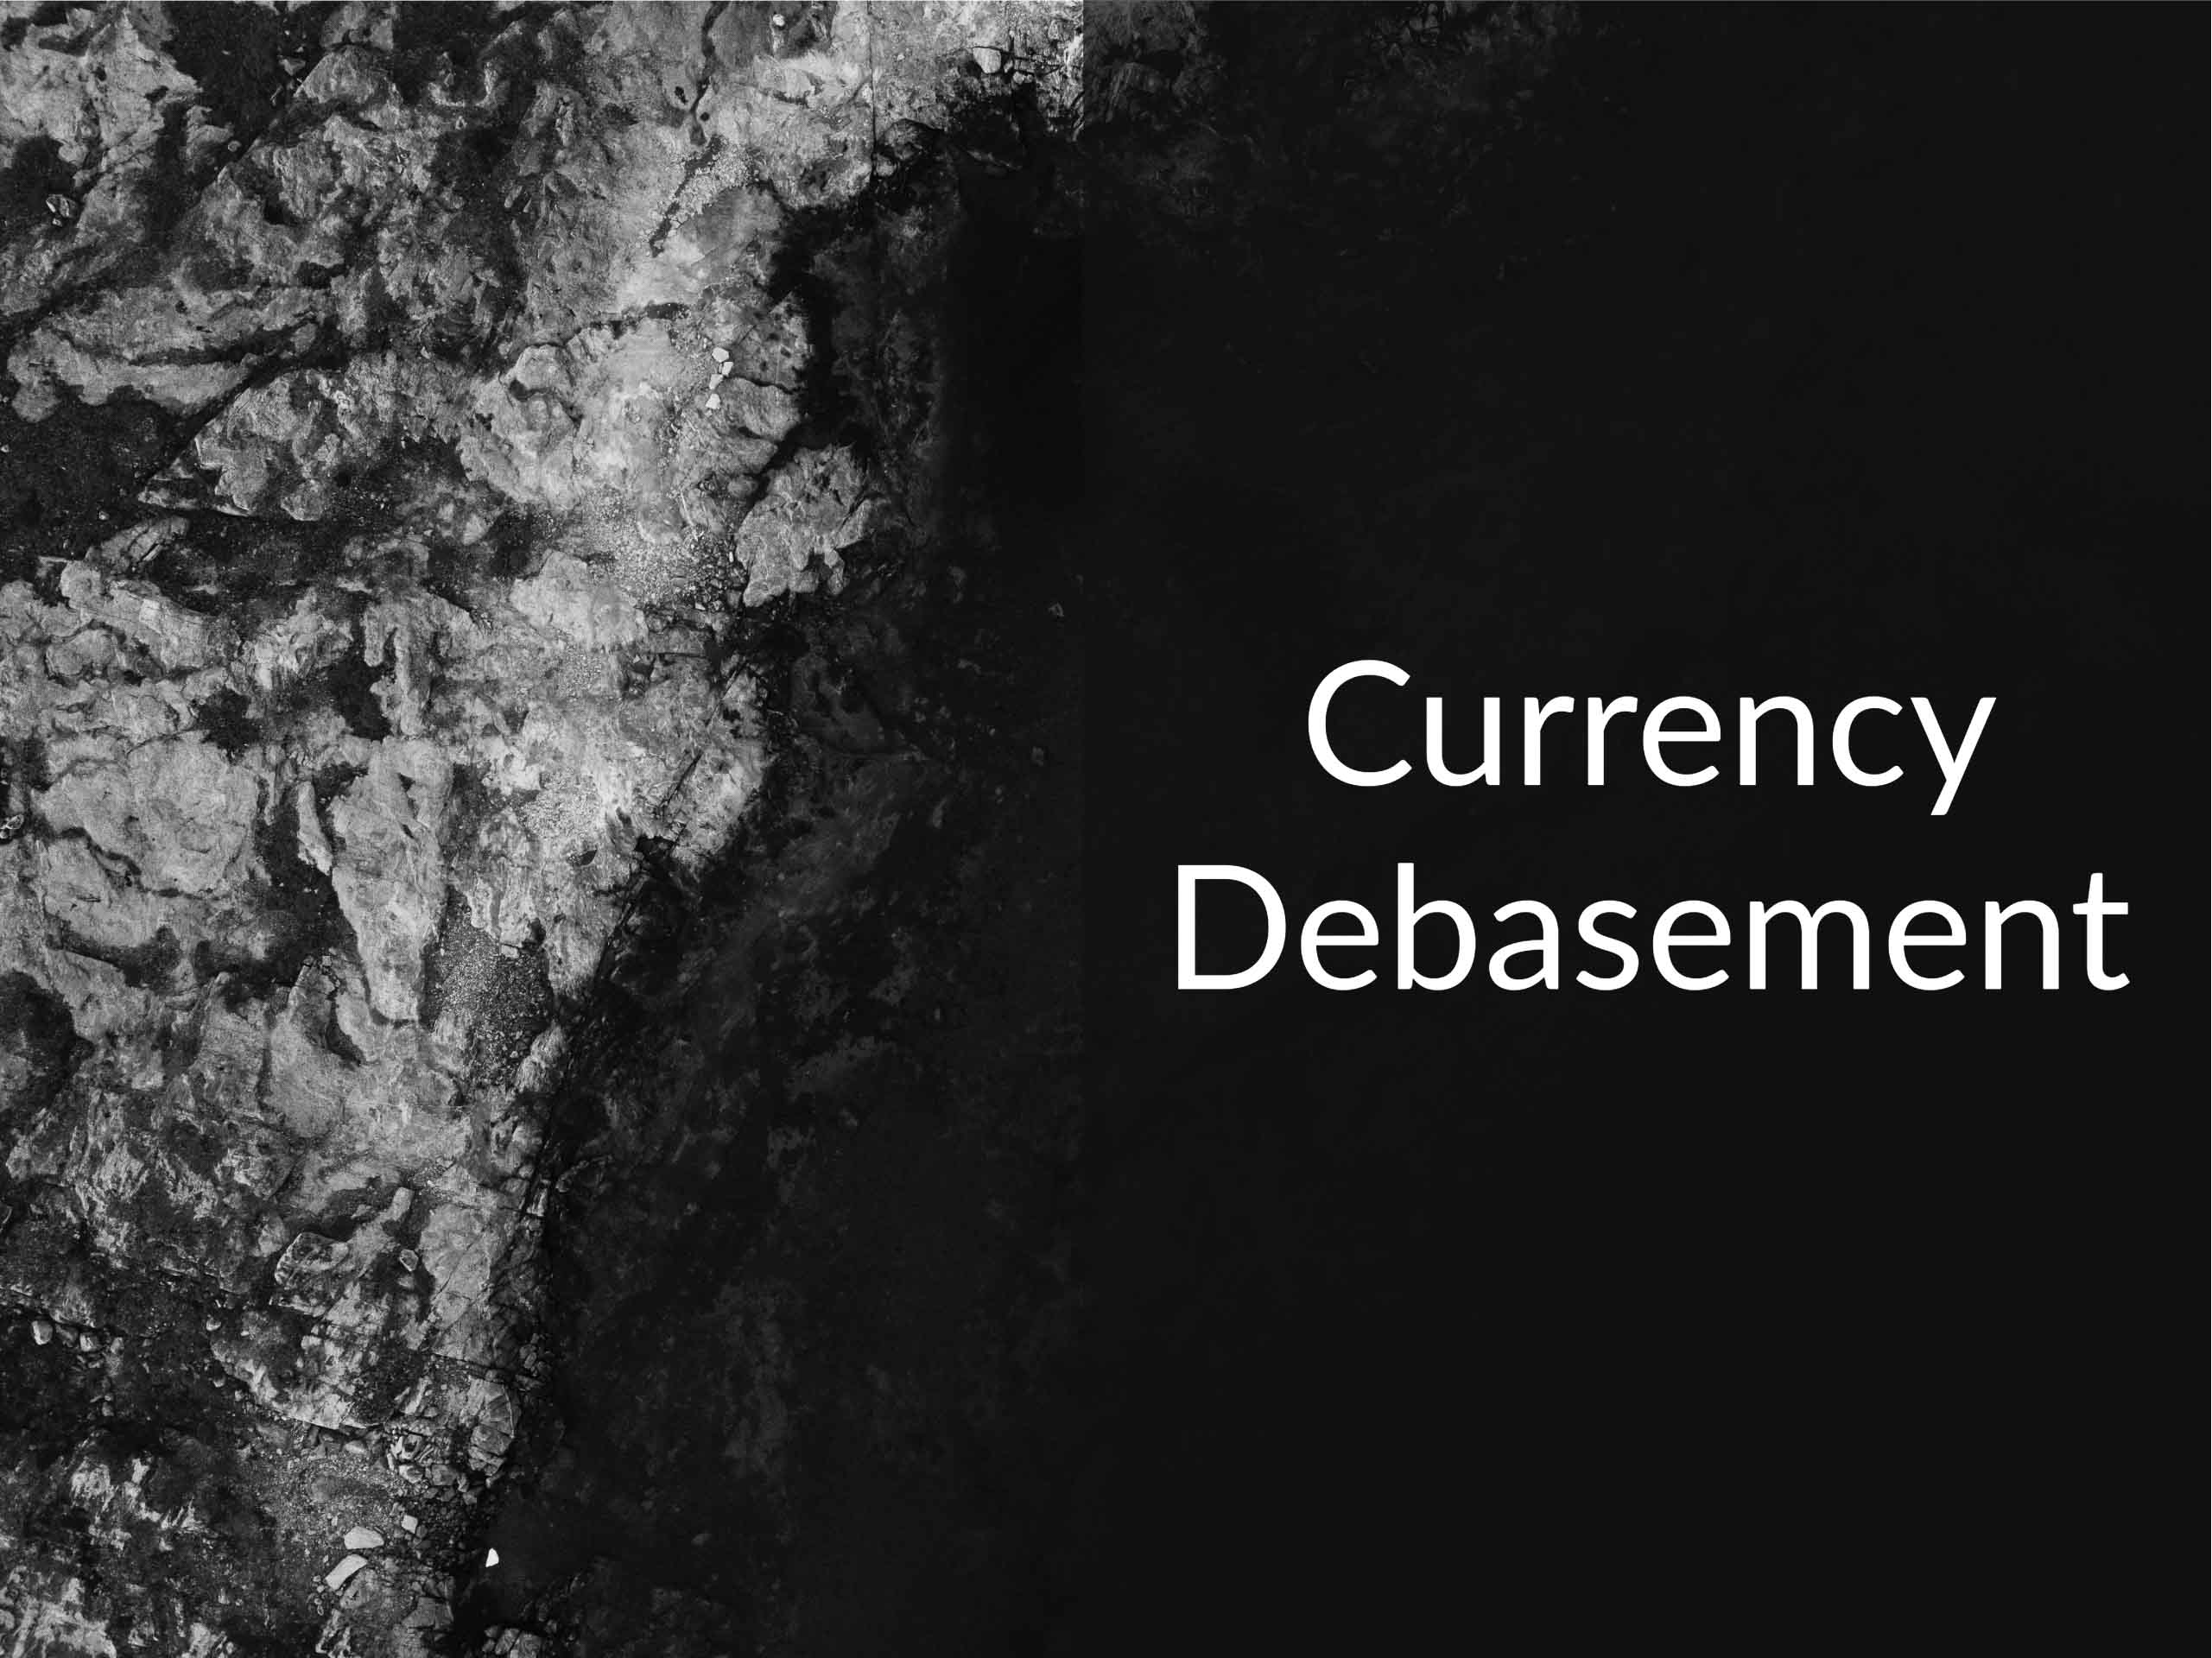 Dark water with a bit of land and the caption "Currency Debasement" 